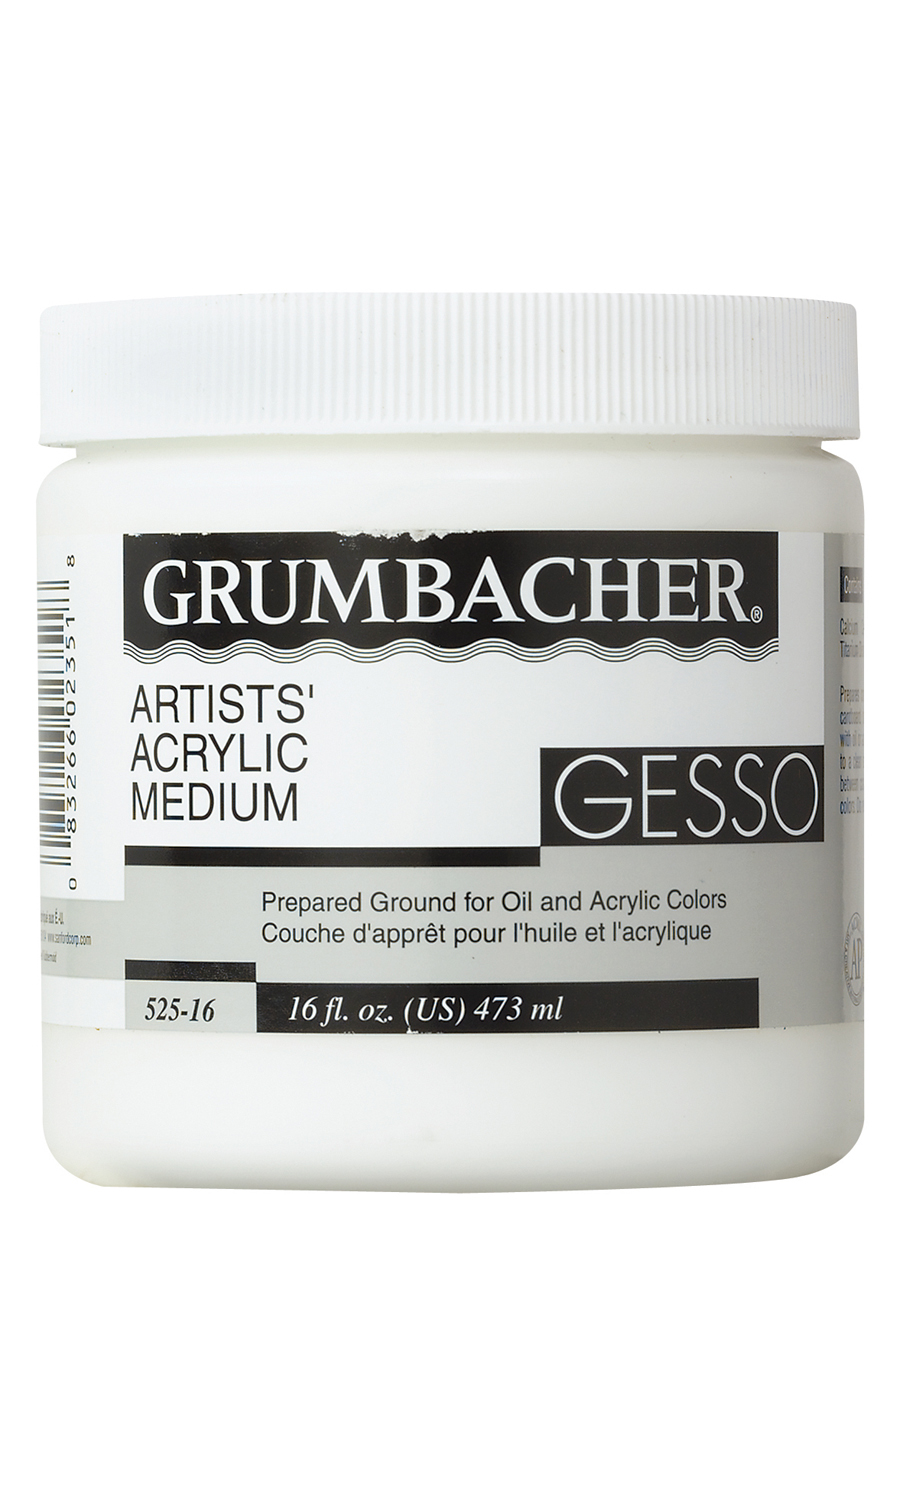 Our White Gesso: Same as it Ever Was